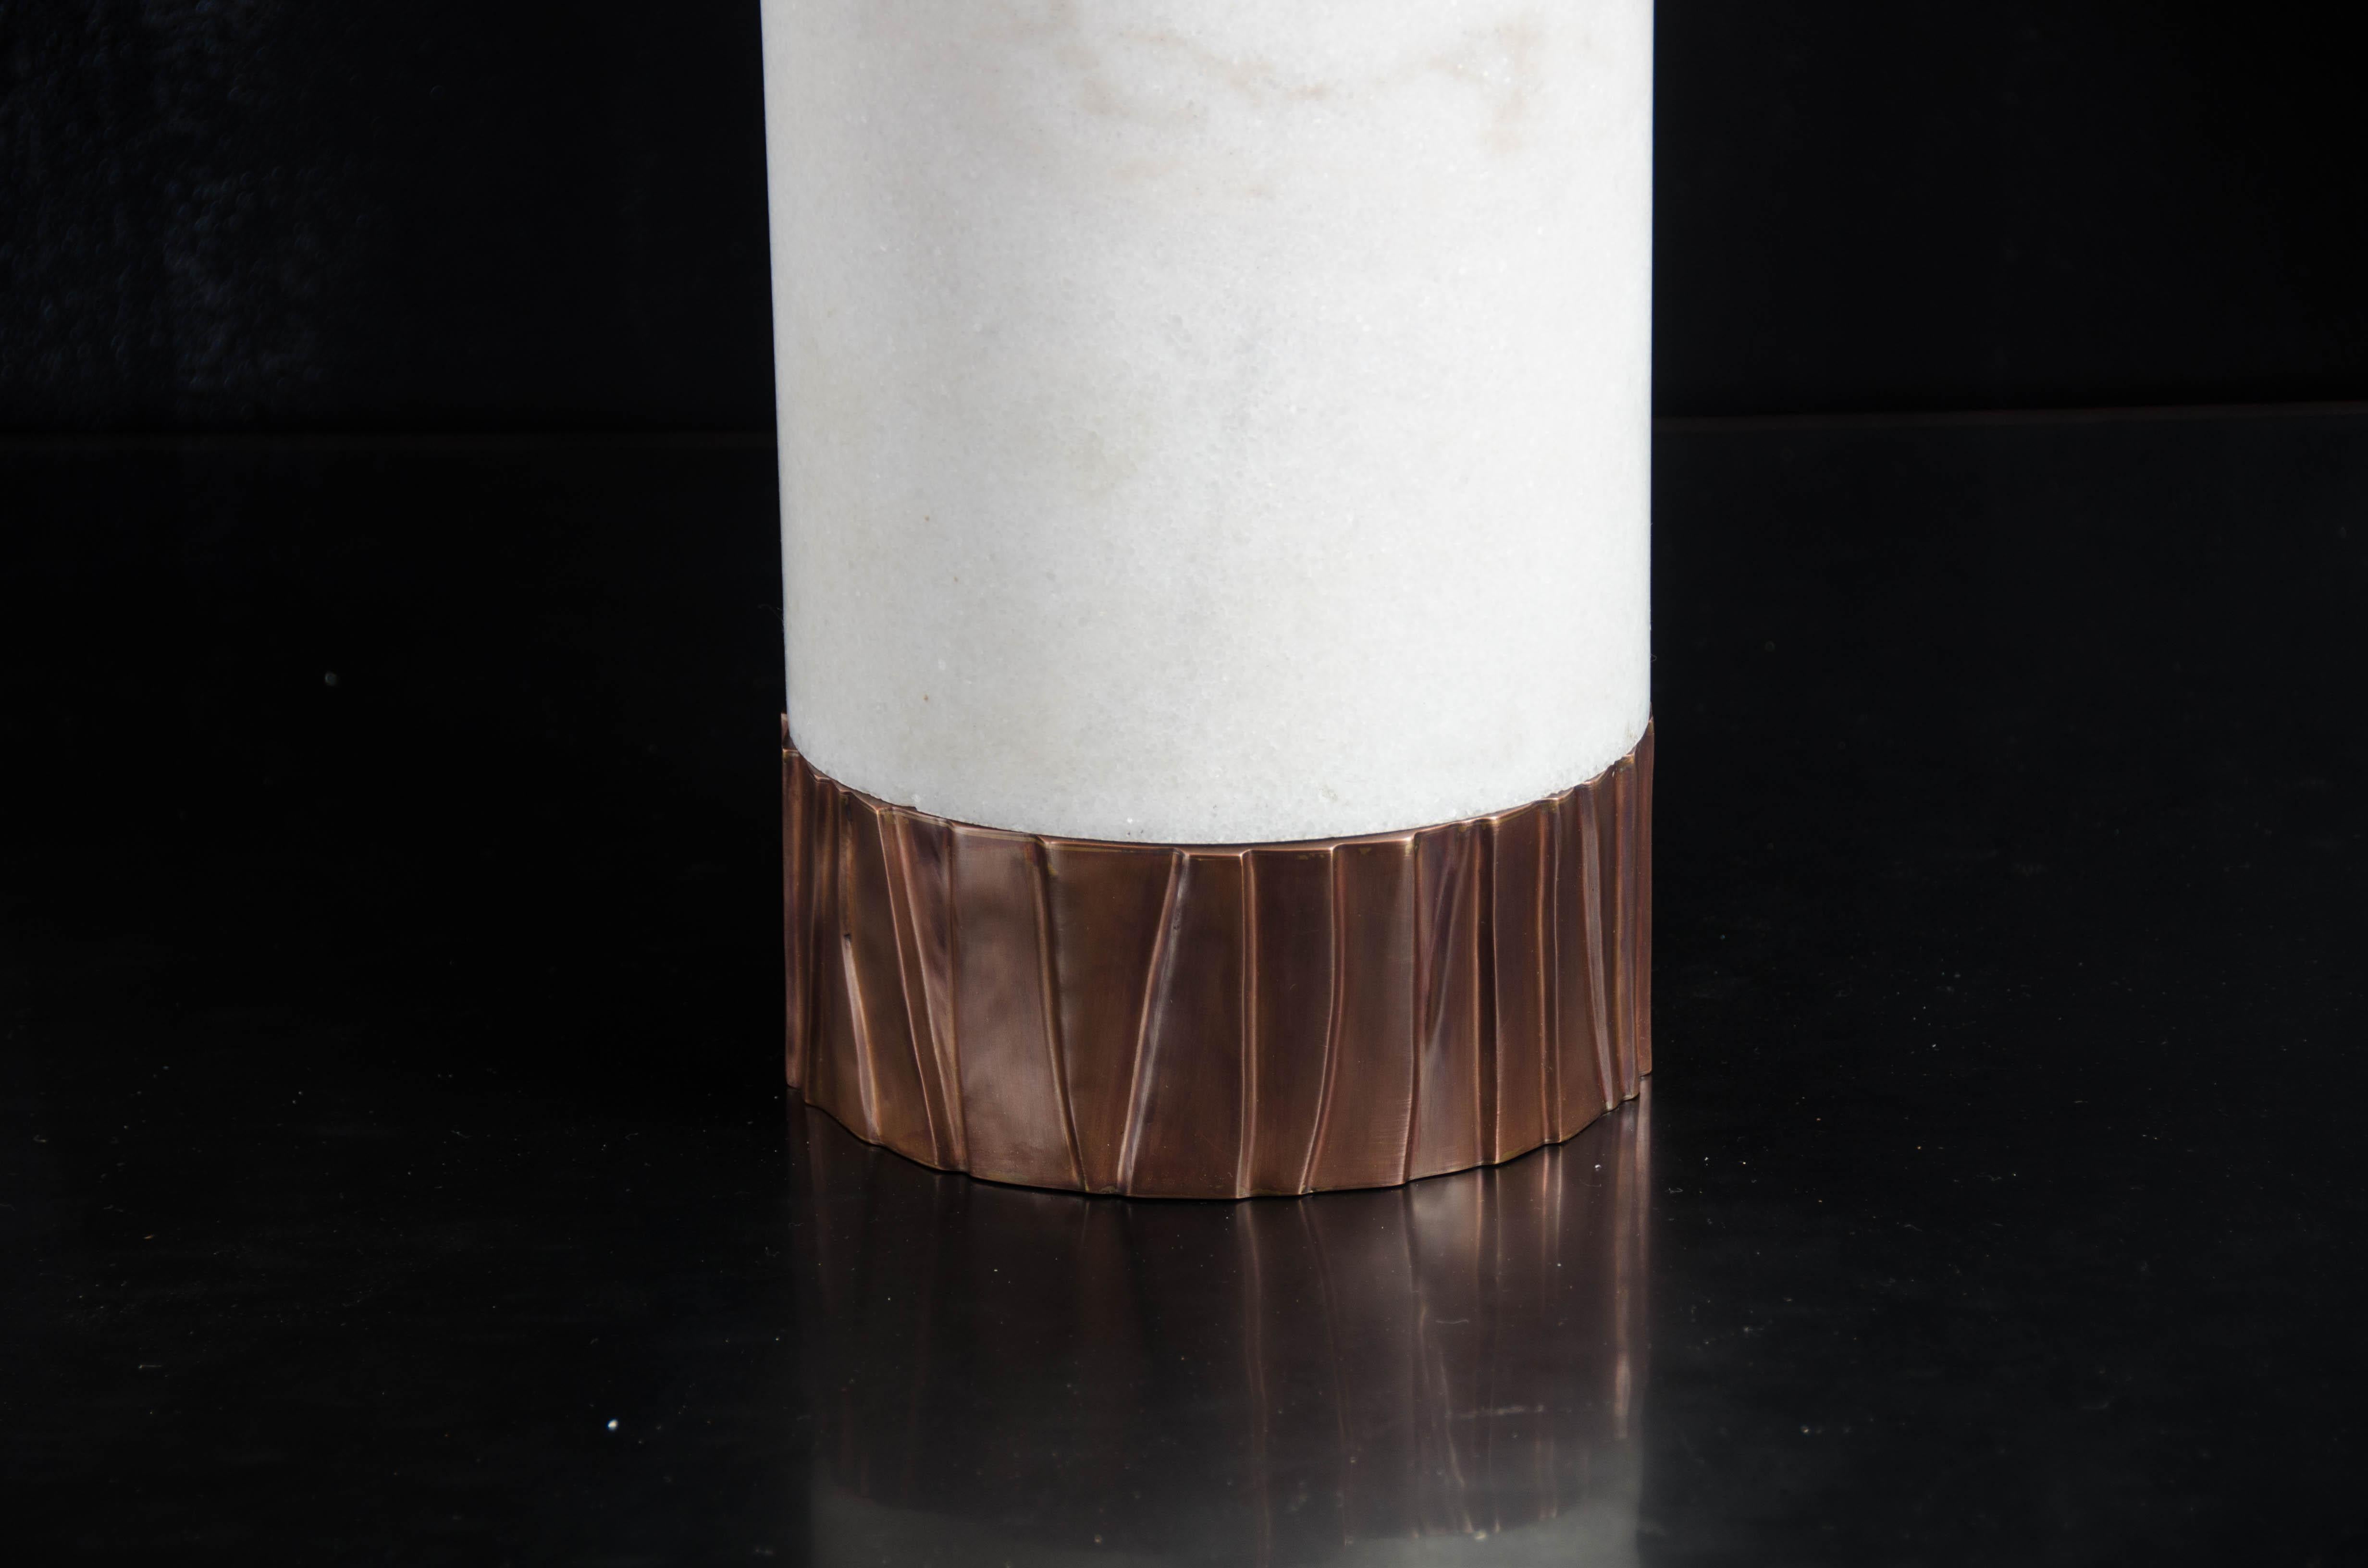 Repoussé Contemporary Cylindrical Alabaster Lamp W/ Copper Kuai Base by Robert Kuo For Sale